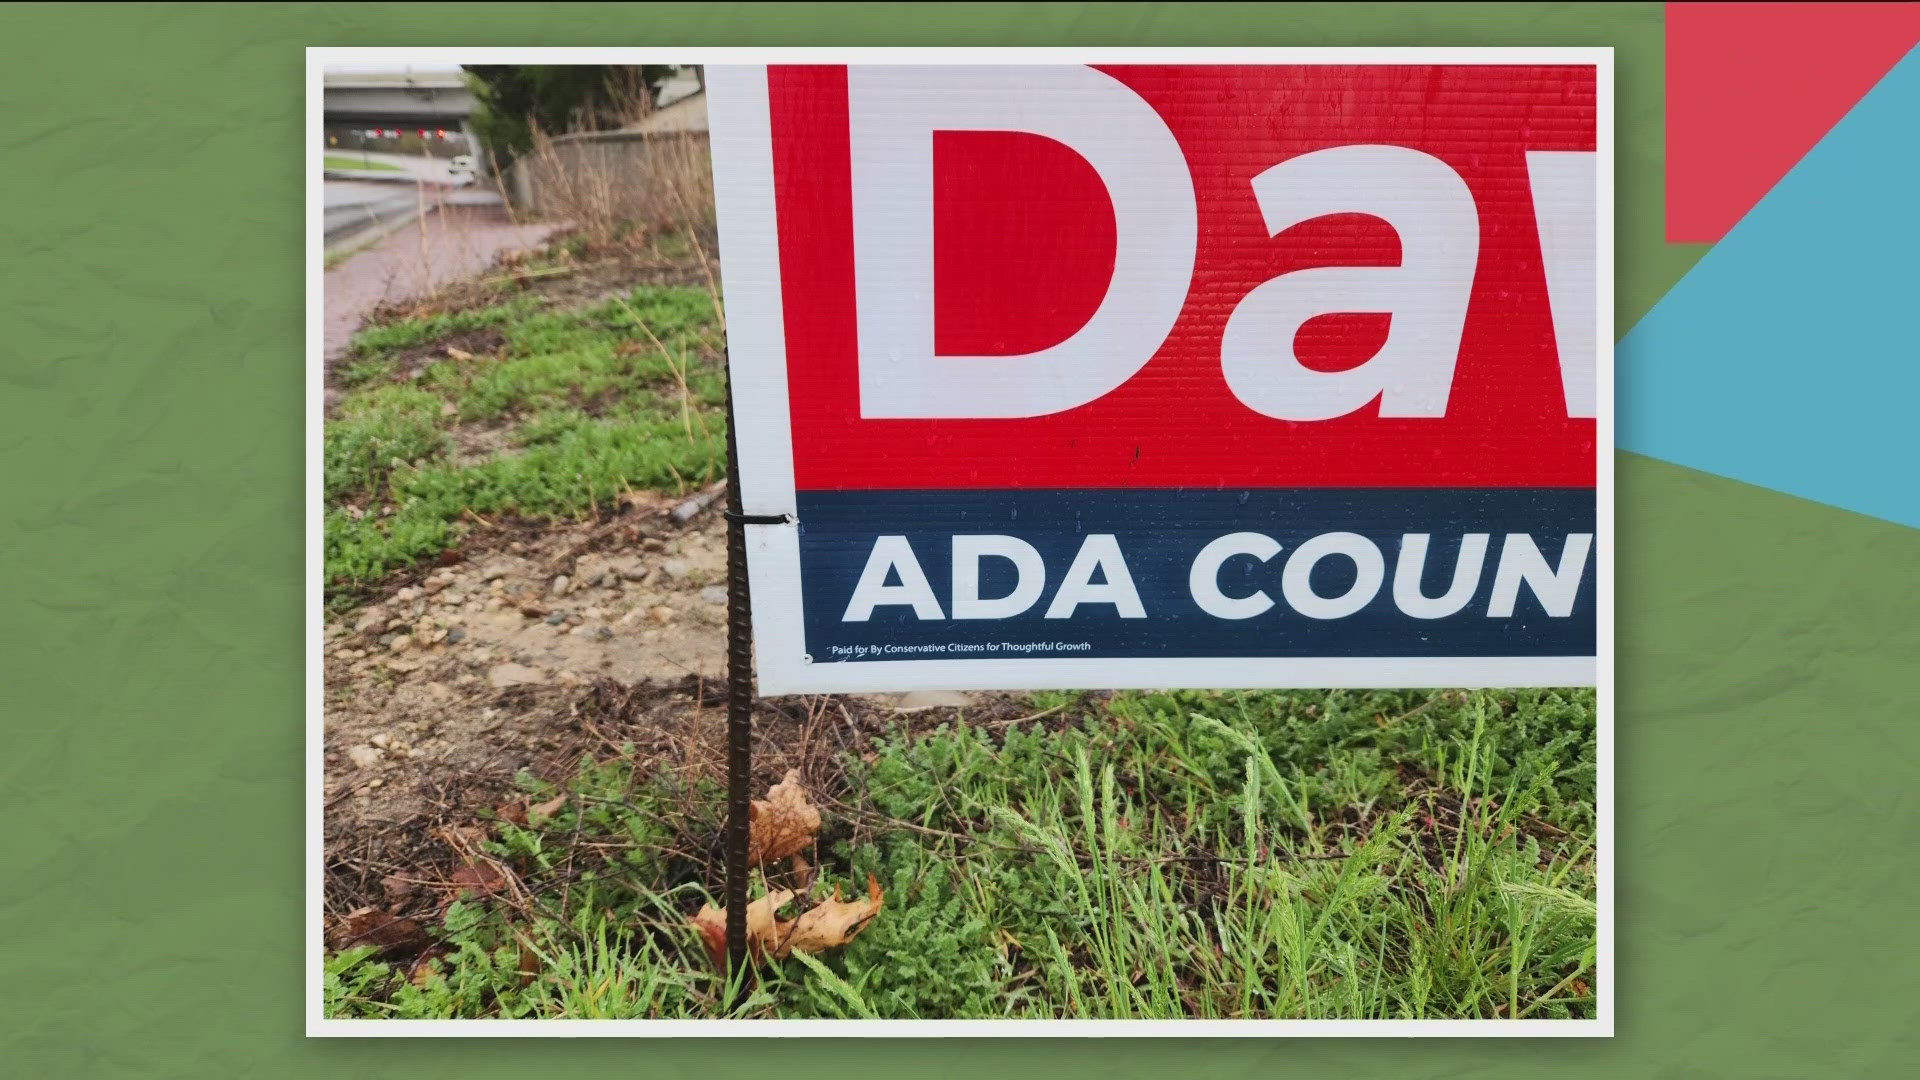 Illegal campaign signs are still up for Ada County commissioner candidate Davidson - problem is, the endorser on the signage actually supports his opponent, Dornier.